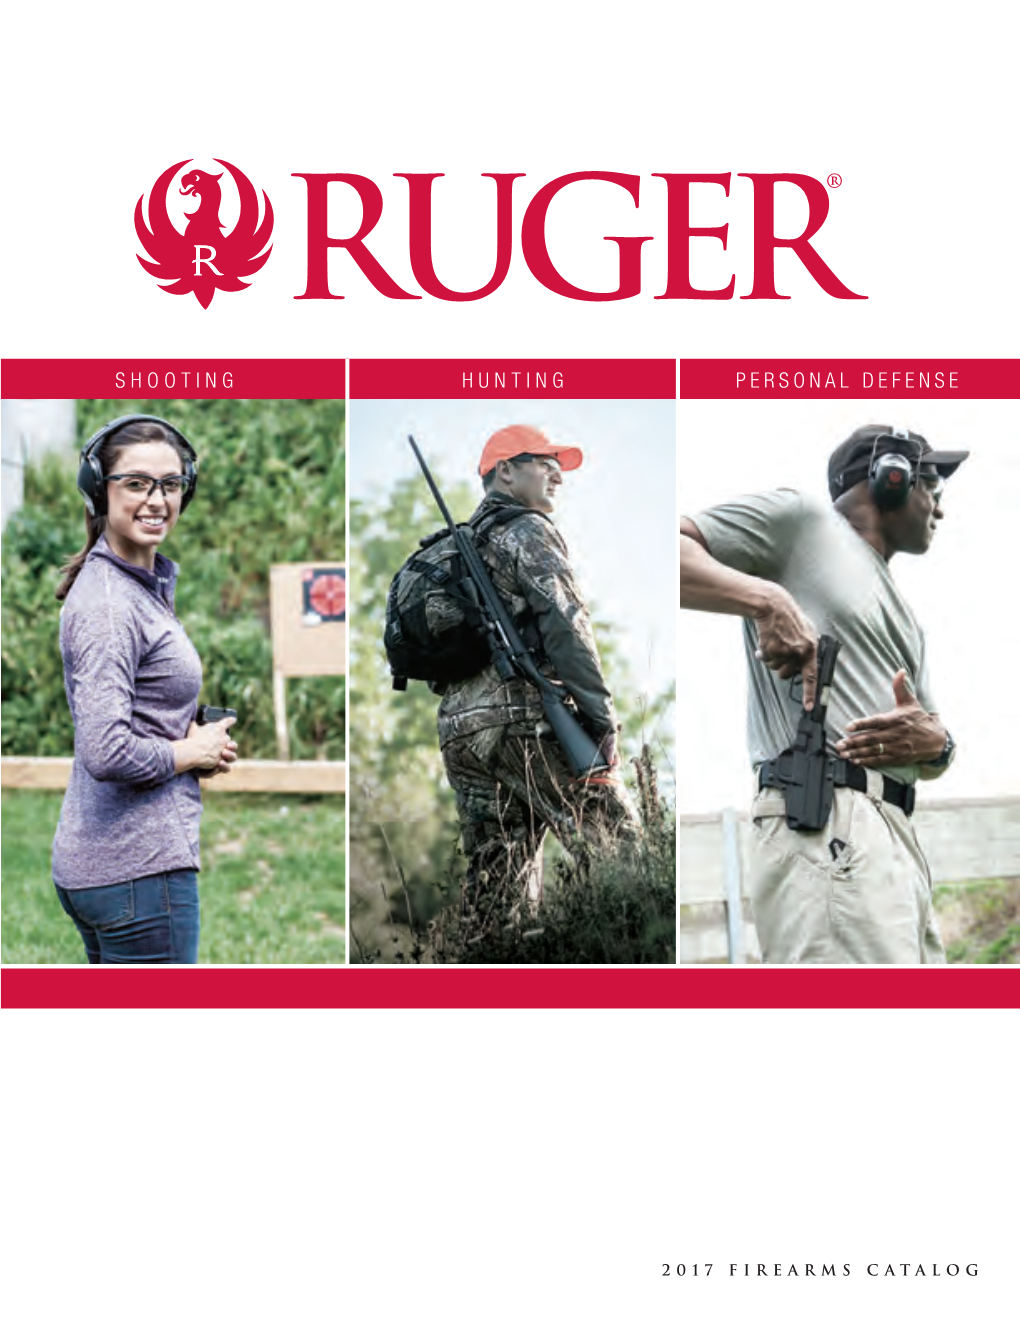 Ruger.Com 2017 Firearms Catalog 1 2 Table of Contents